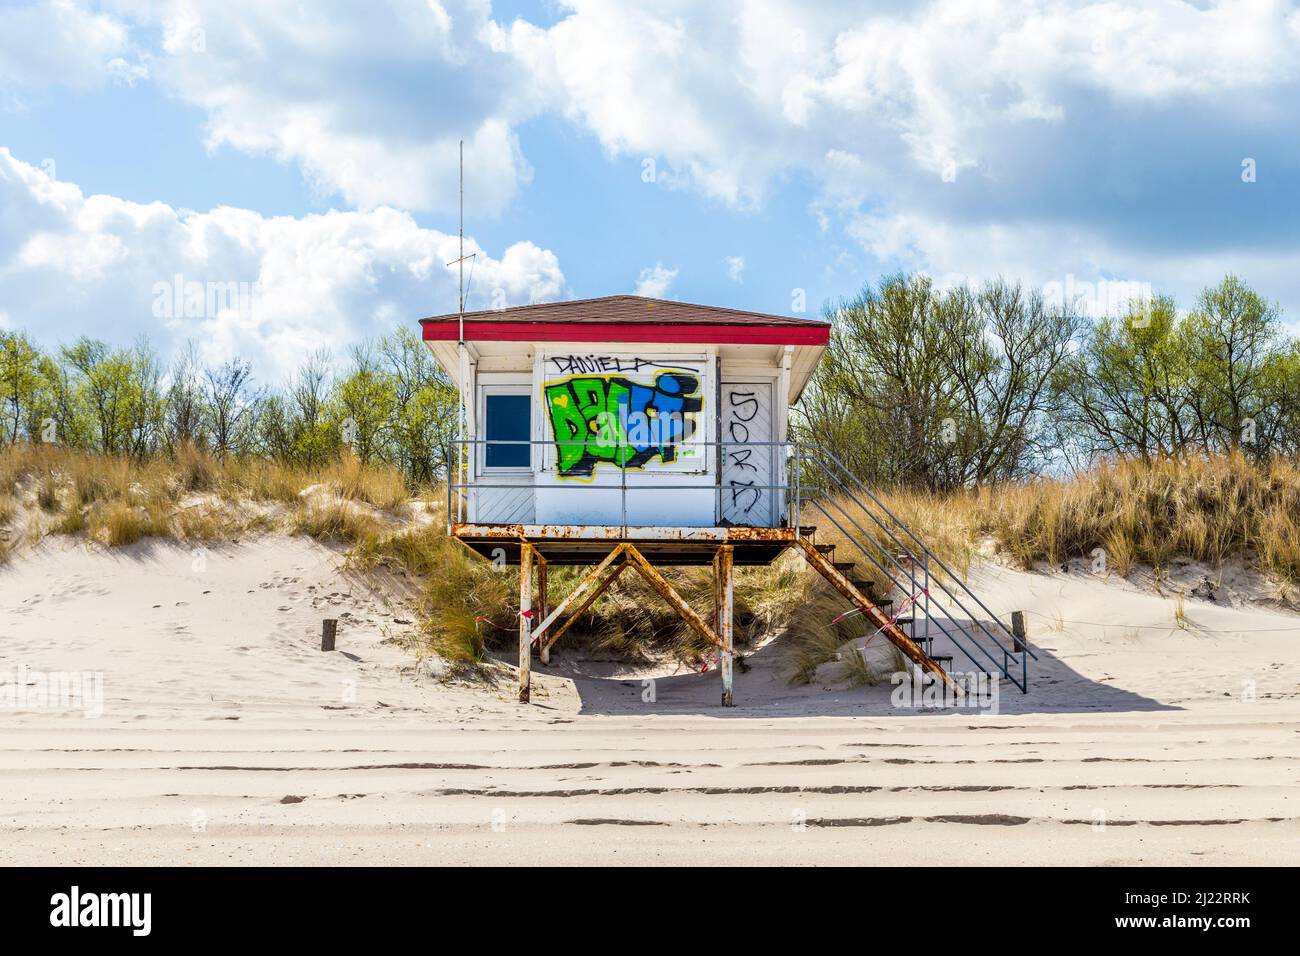 Koserow, Usedom - April 13, 2014: beach hut with Grafity in Koserow, Usedom. The tourist season starts end of April and the beach huts are cleaned of Stock Photo